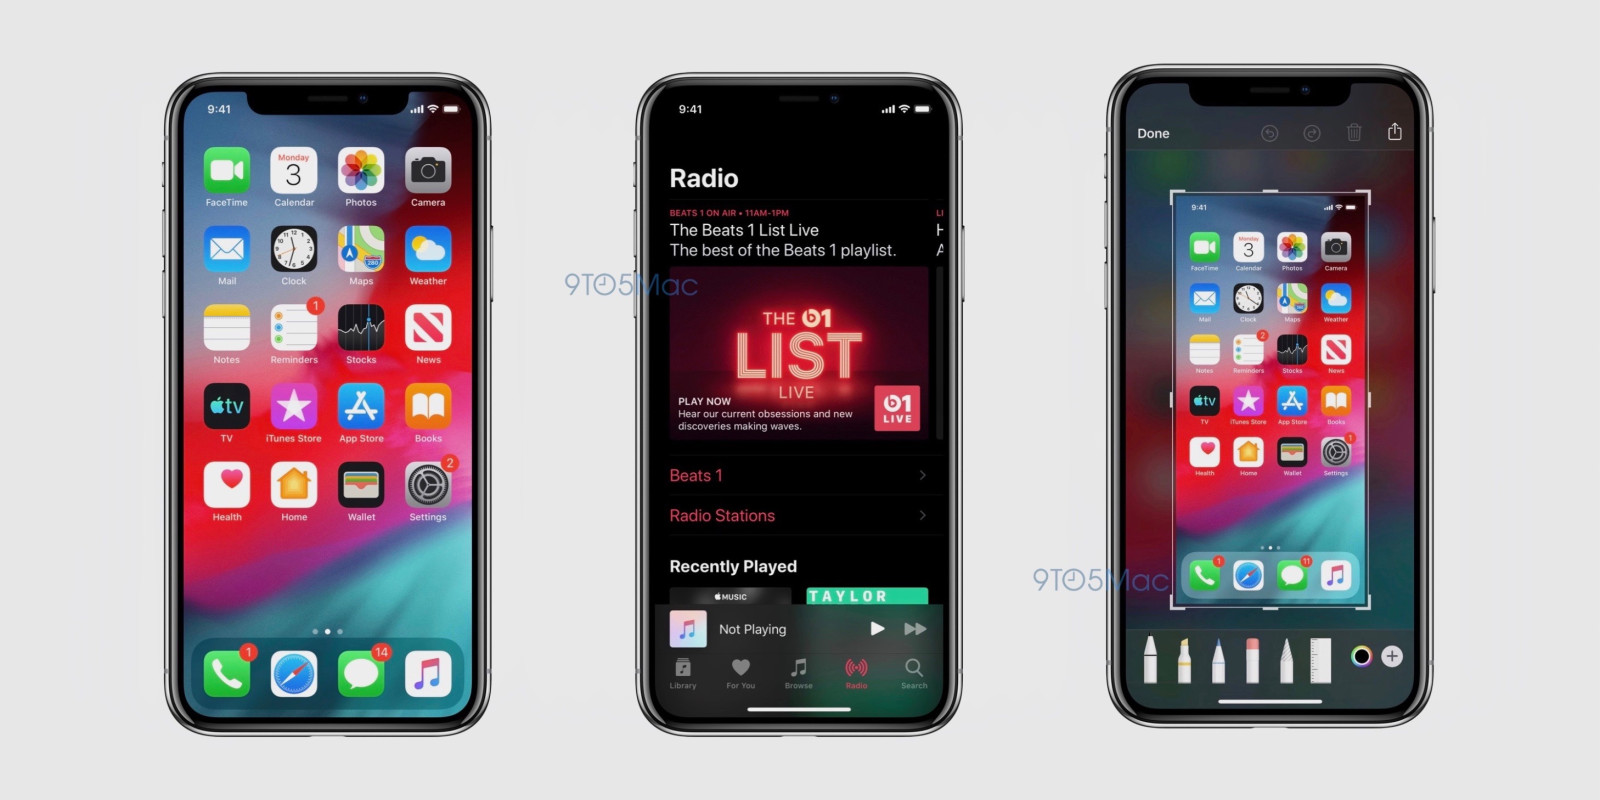 the-dark-mode-craze-may-do-more-harm-than-good-this-is-why-techradar